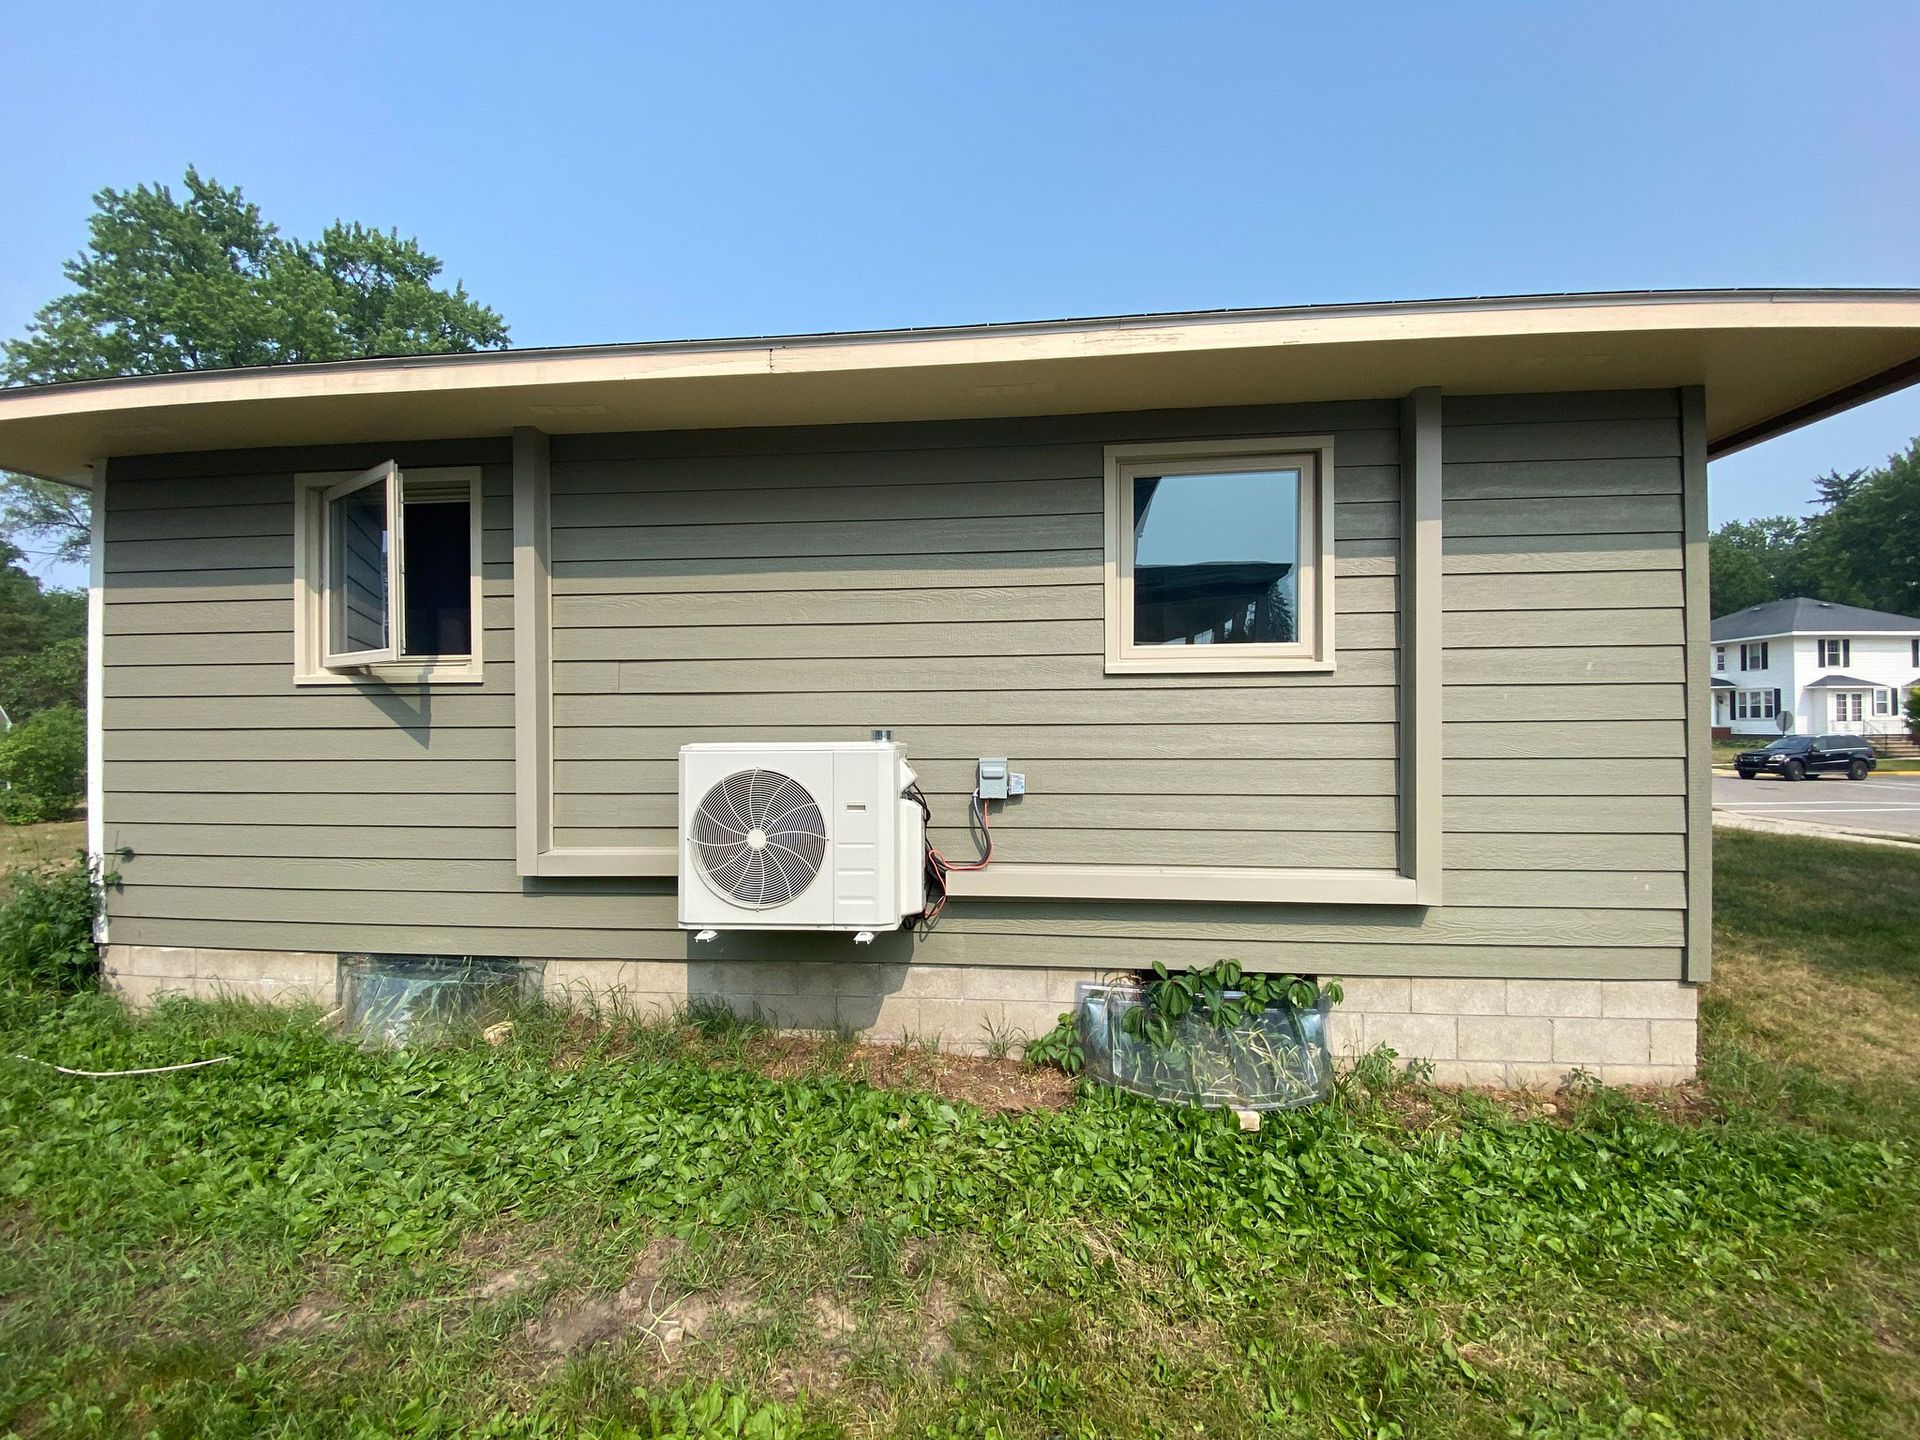 Heat pump on the outside of a green house.